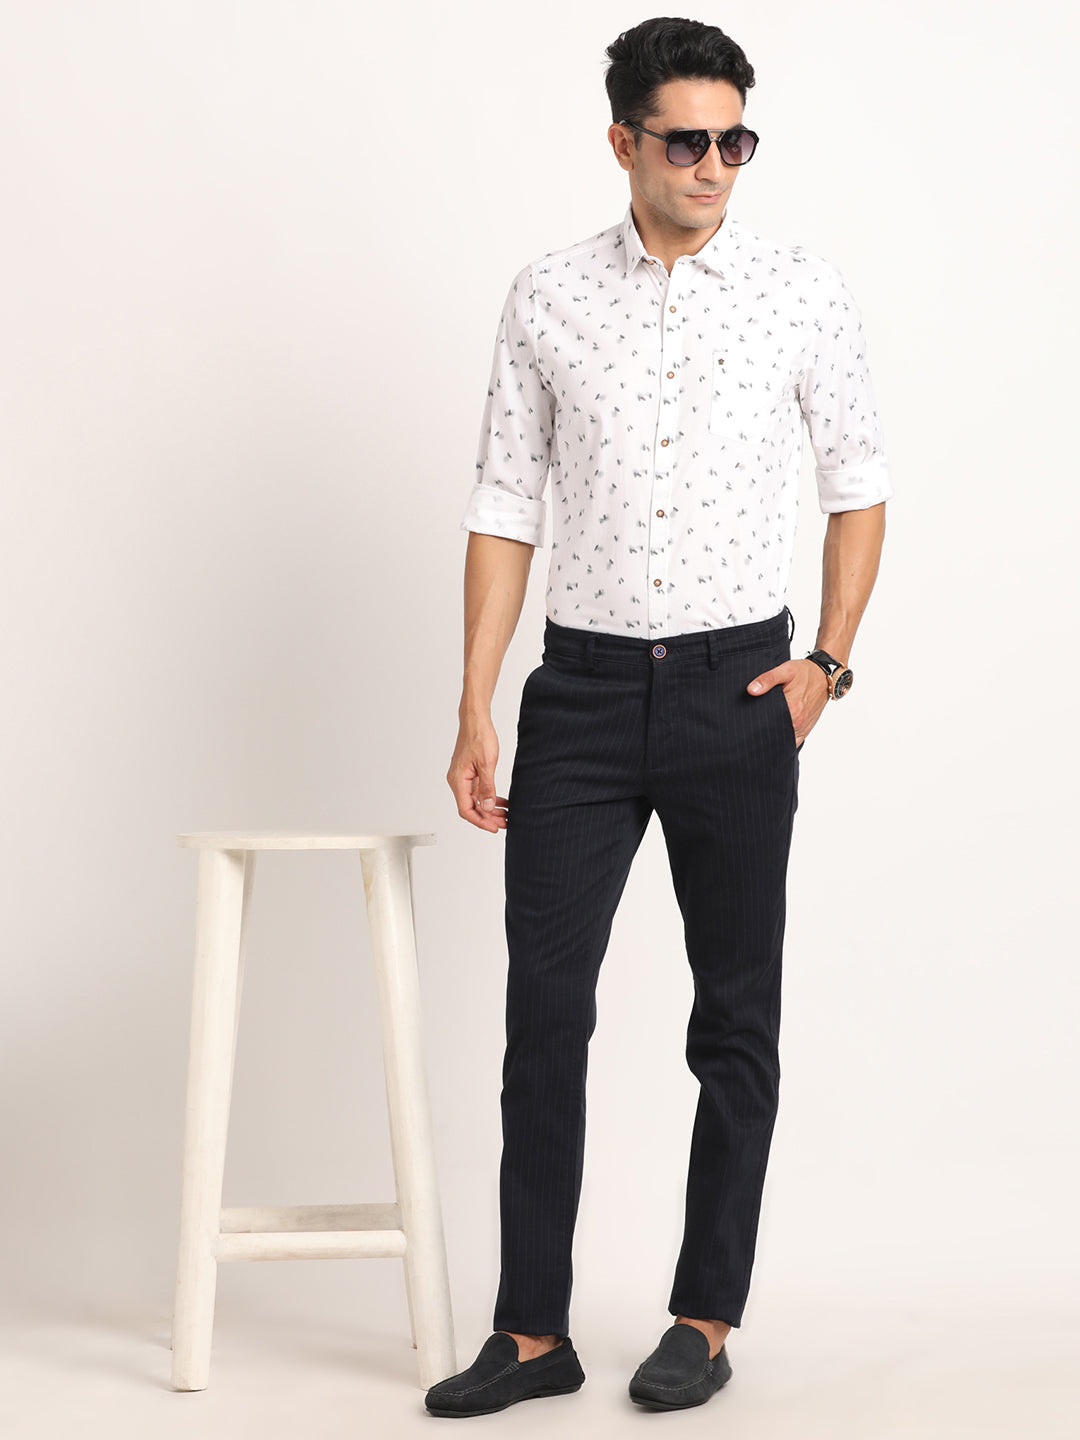 Cotton Linen Off White Printed Slim Fit Full Sleeve Casual Shirt